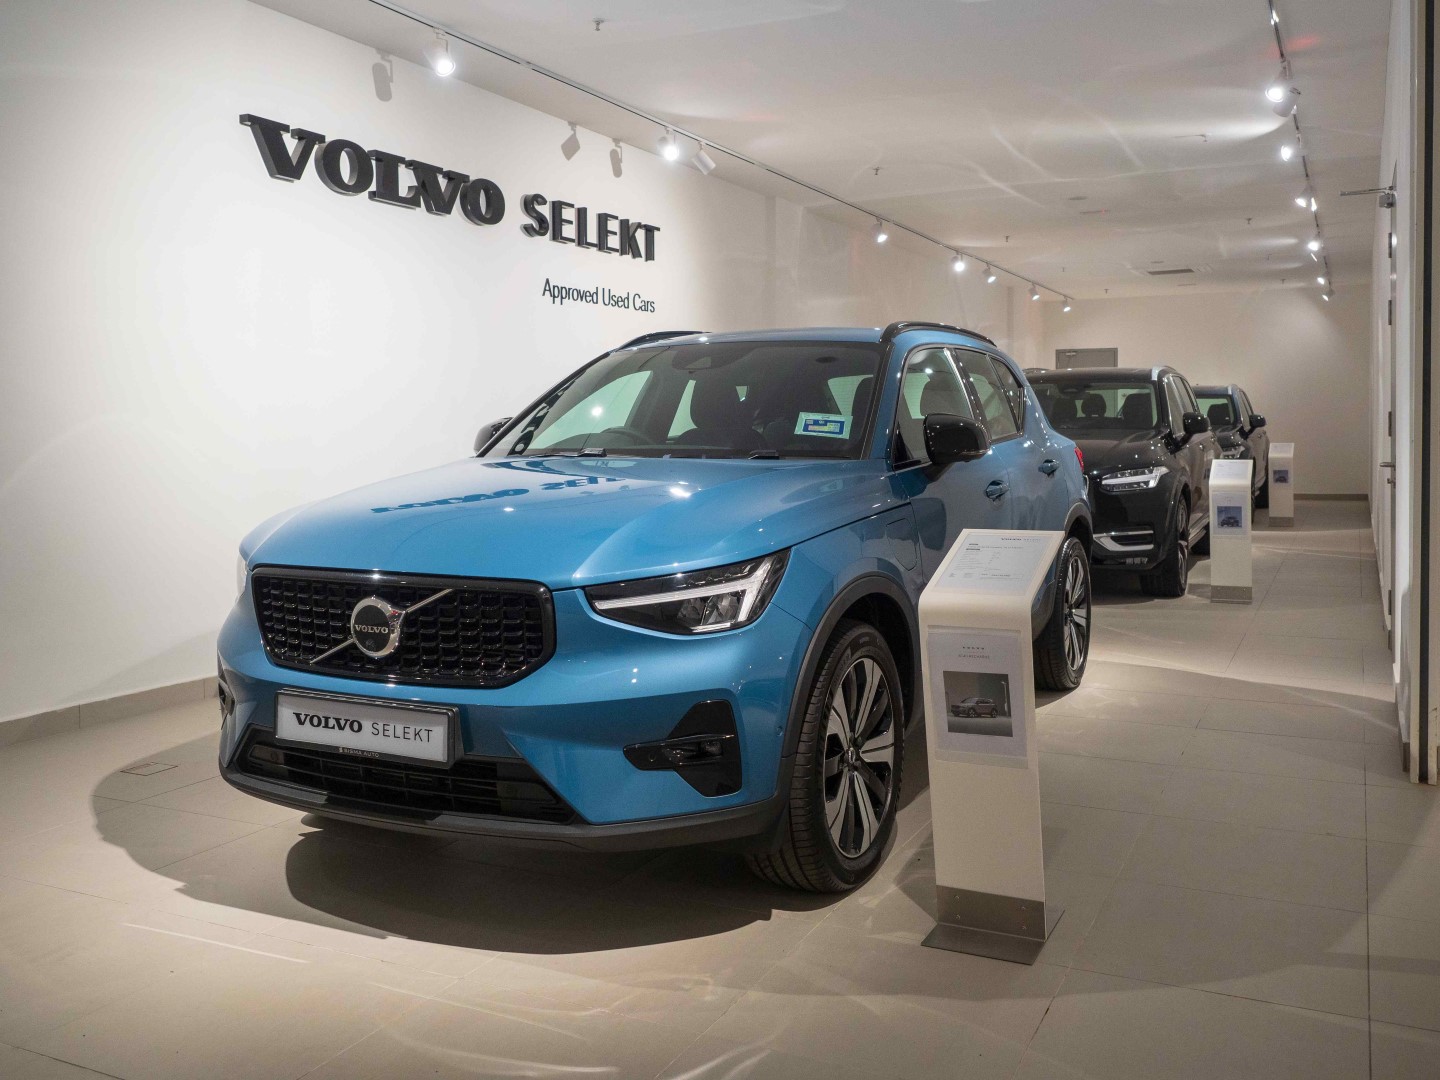 Malaysia’s largest Volvo showroom now open in Sungai Besi